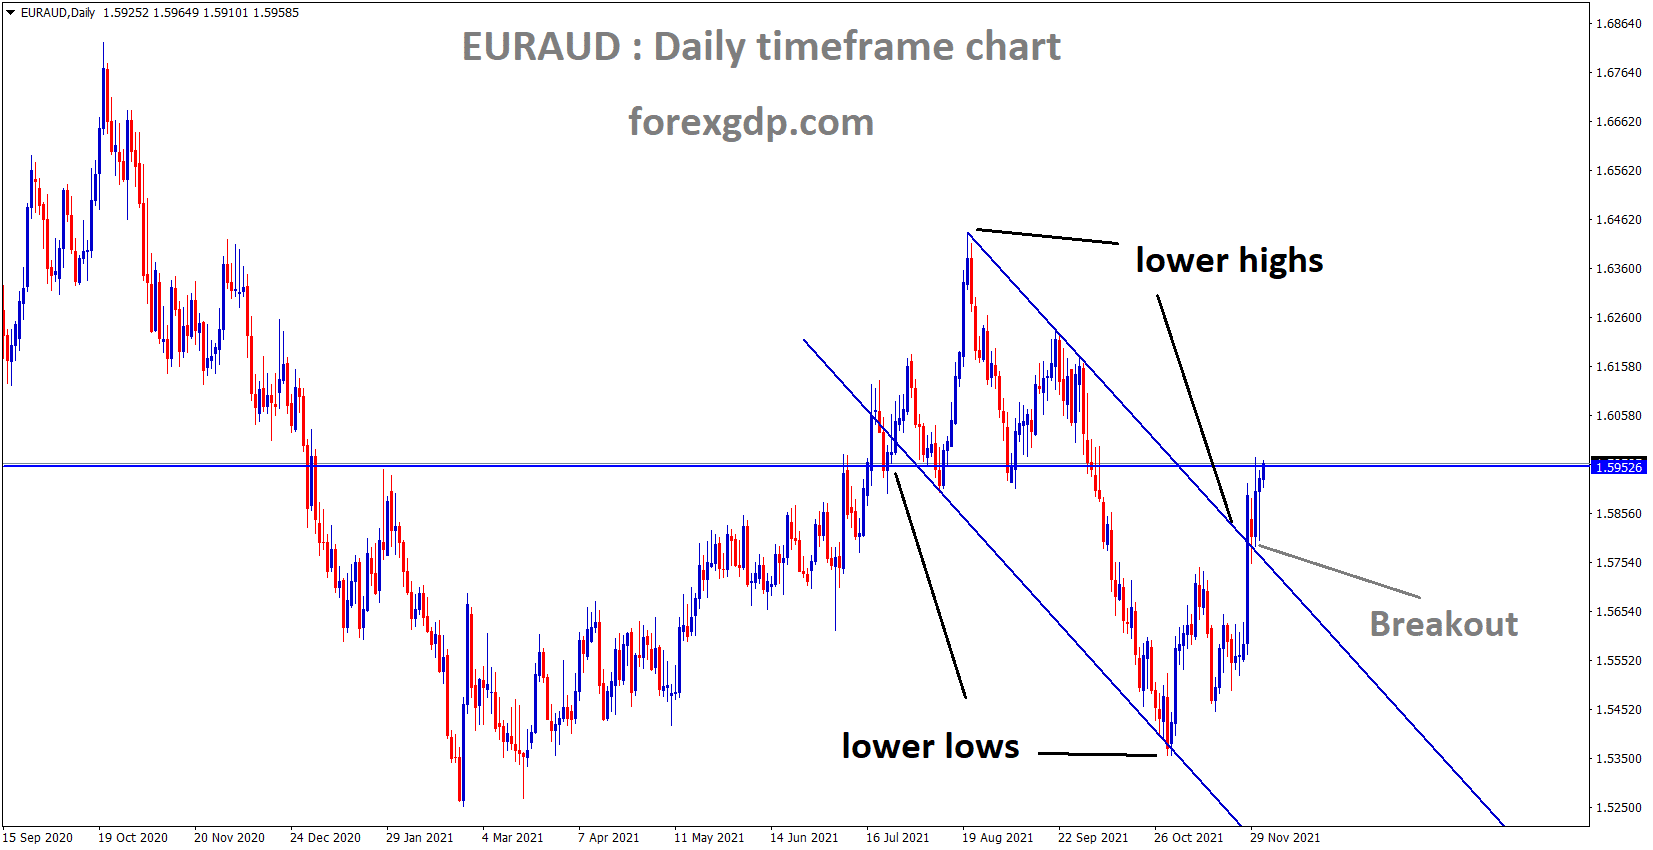 EURAUD has broken the Descending channel and the market reached the Horizontal Resistance area.